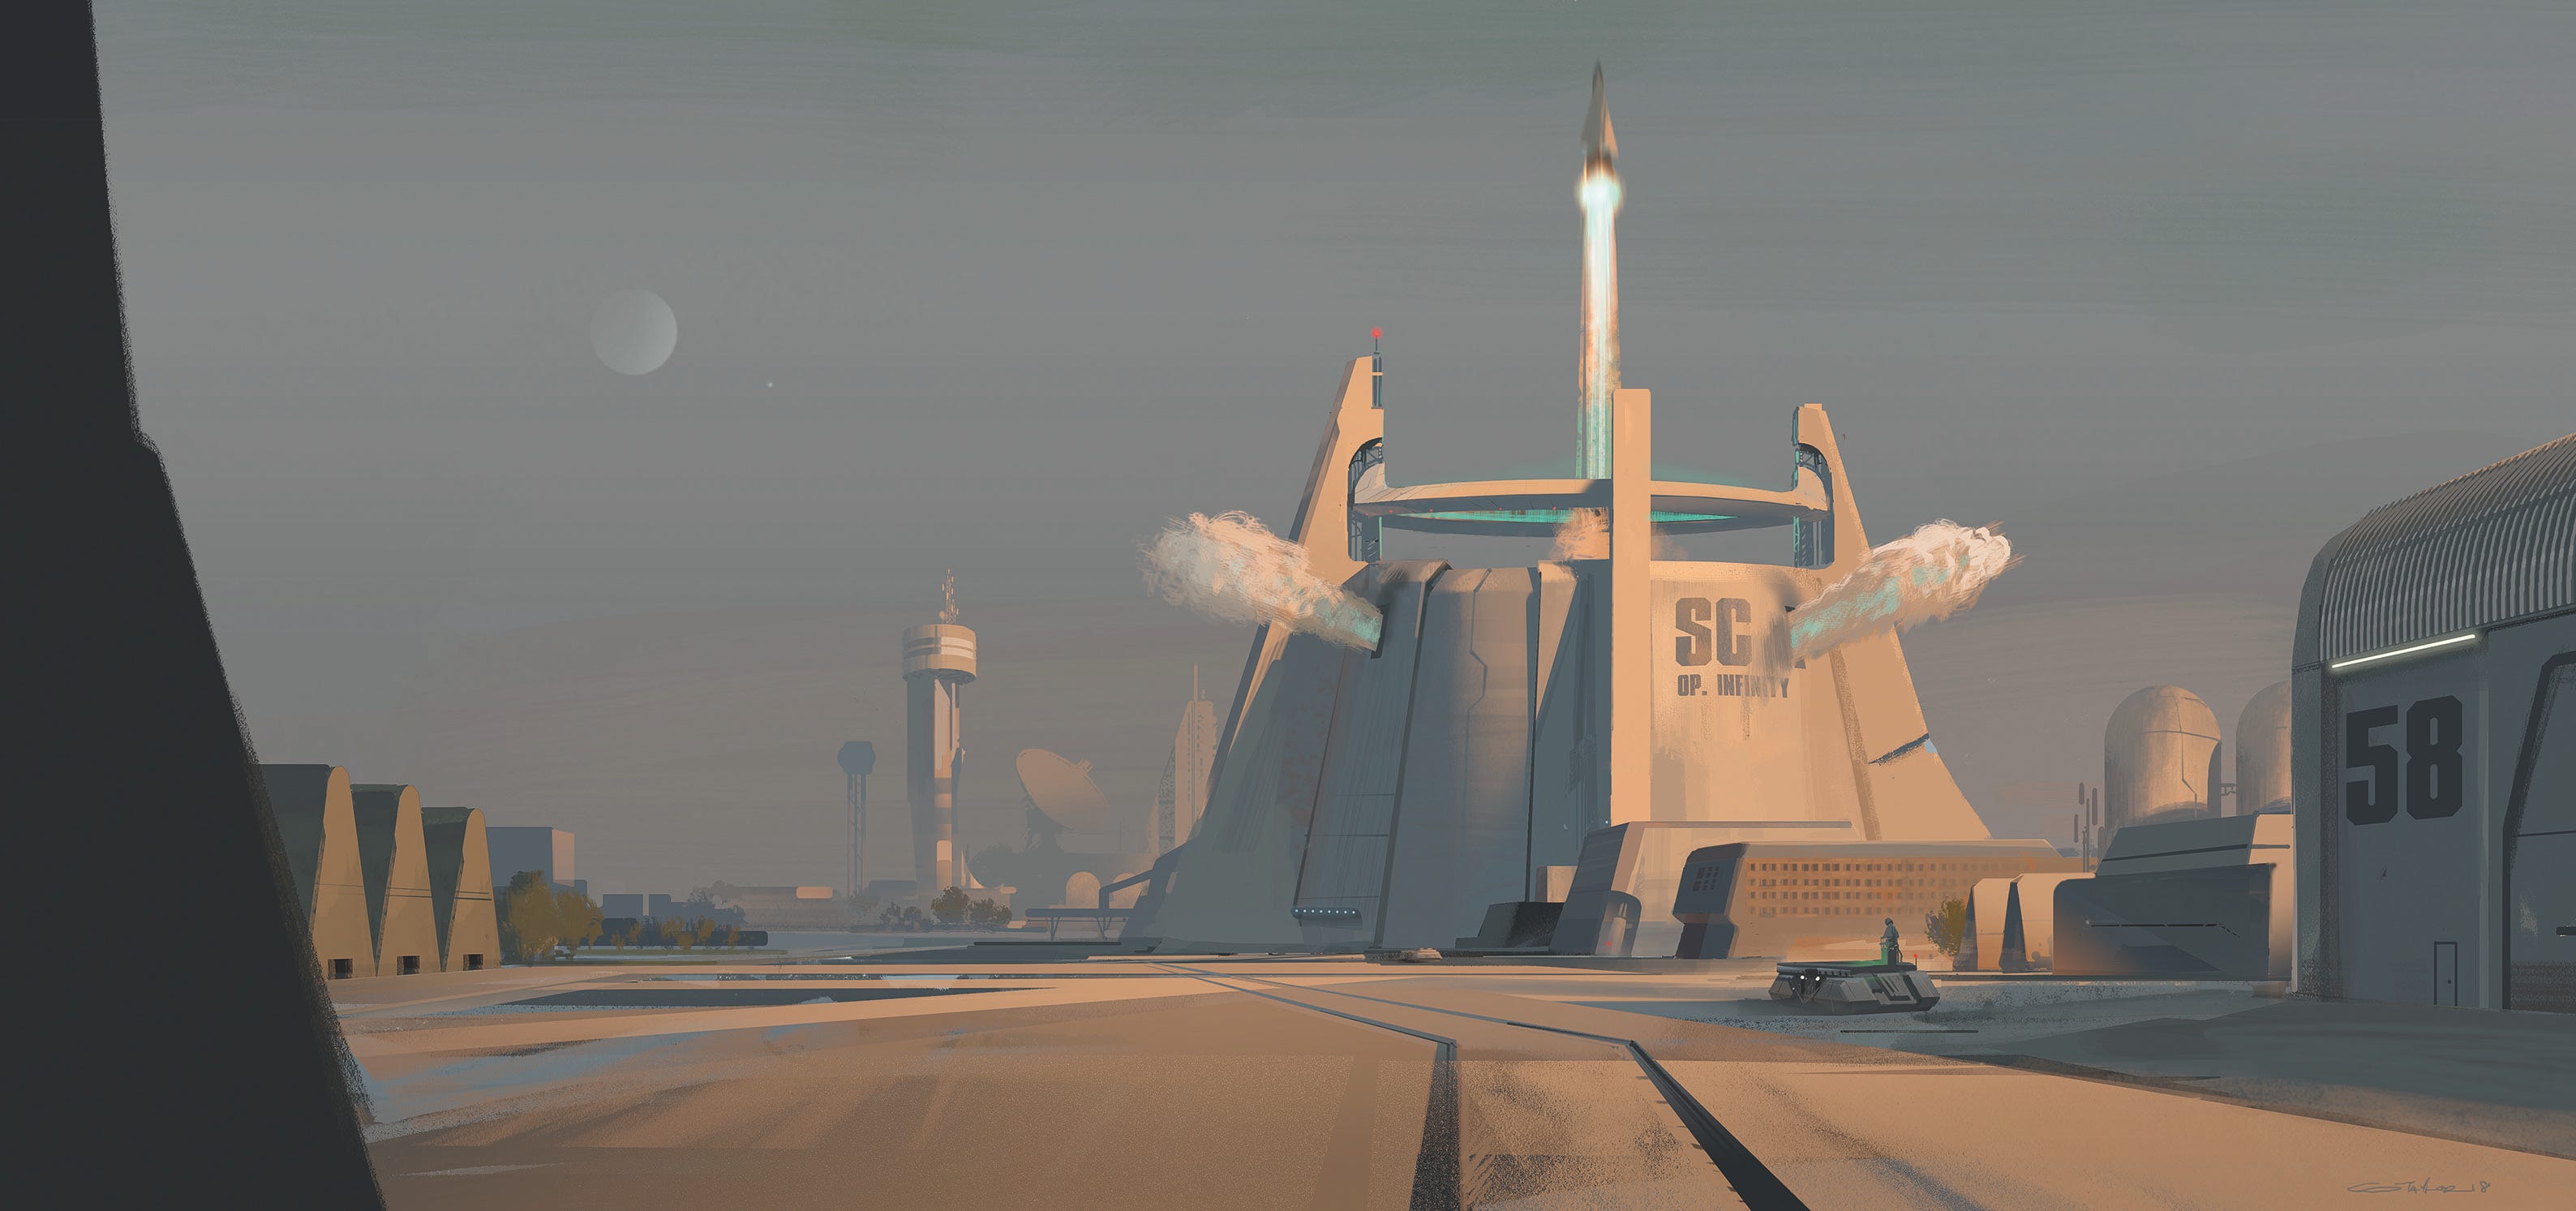 lightyear environment concept art, with a shuttle taking off from a tranquil, futuristic launchpad